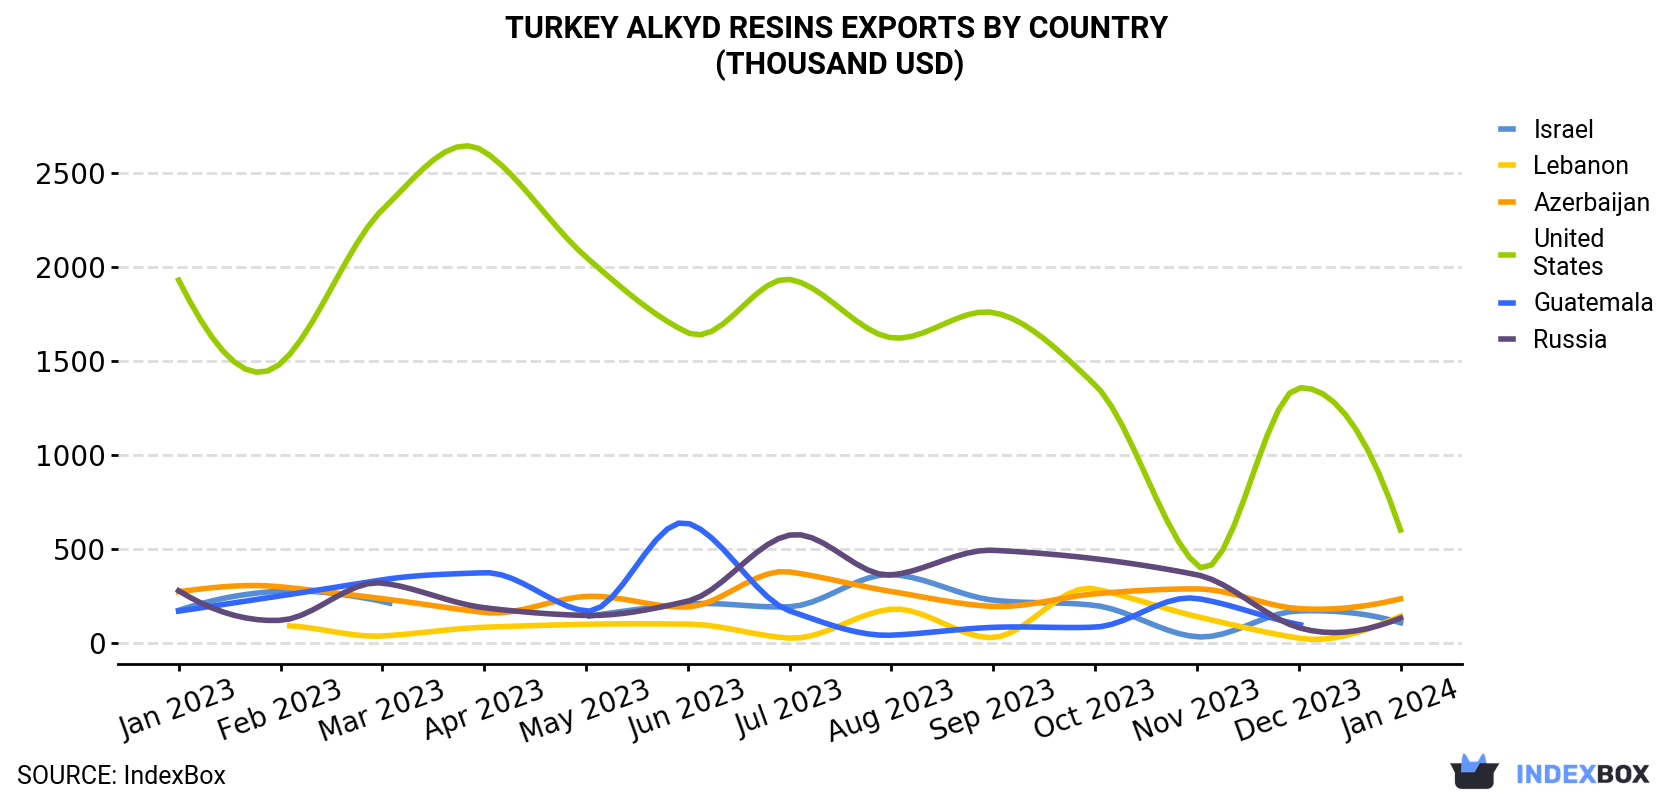 Turkey Alkyd Resins Exports By Country (Thousand USD)